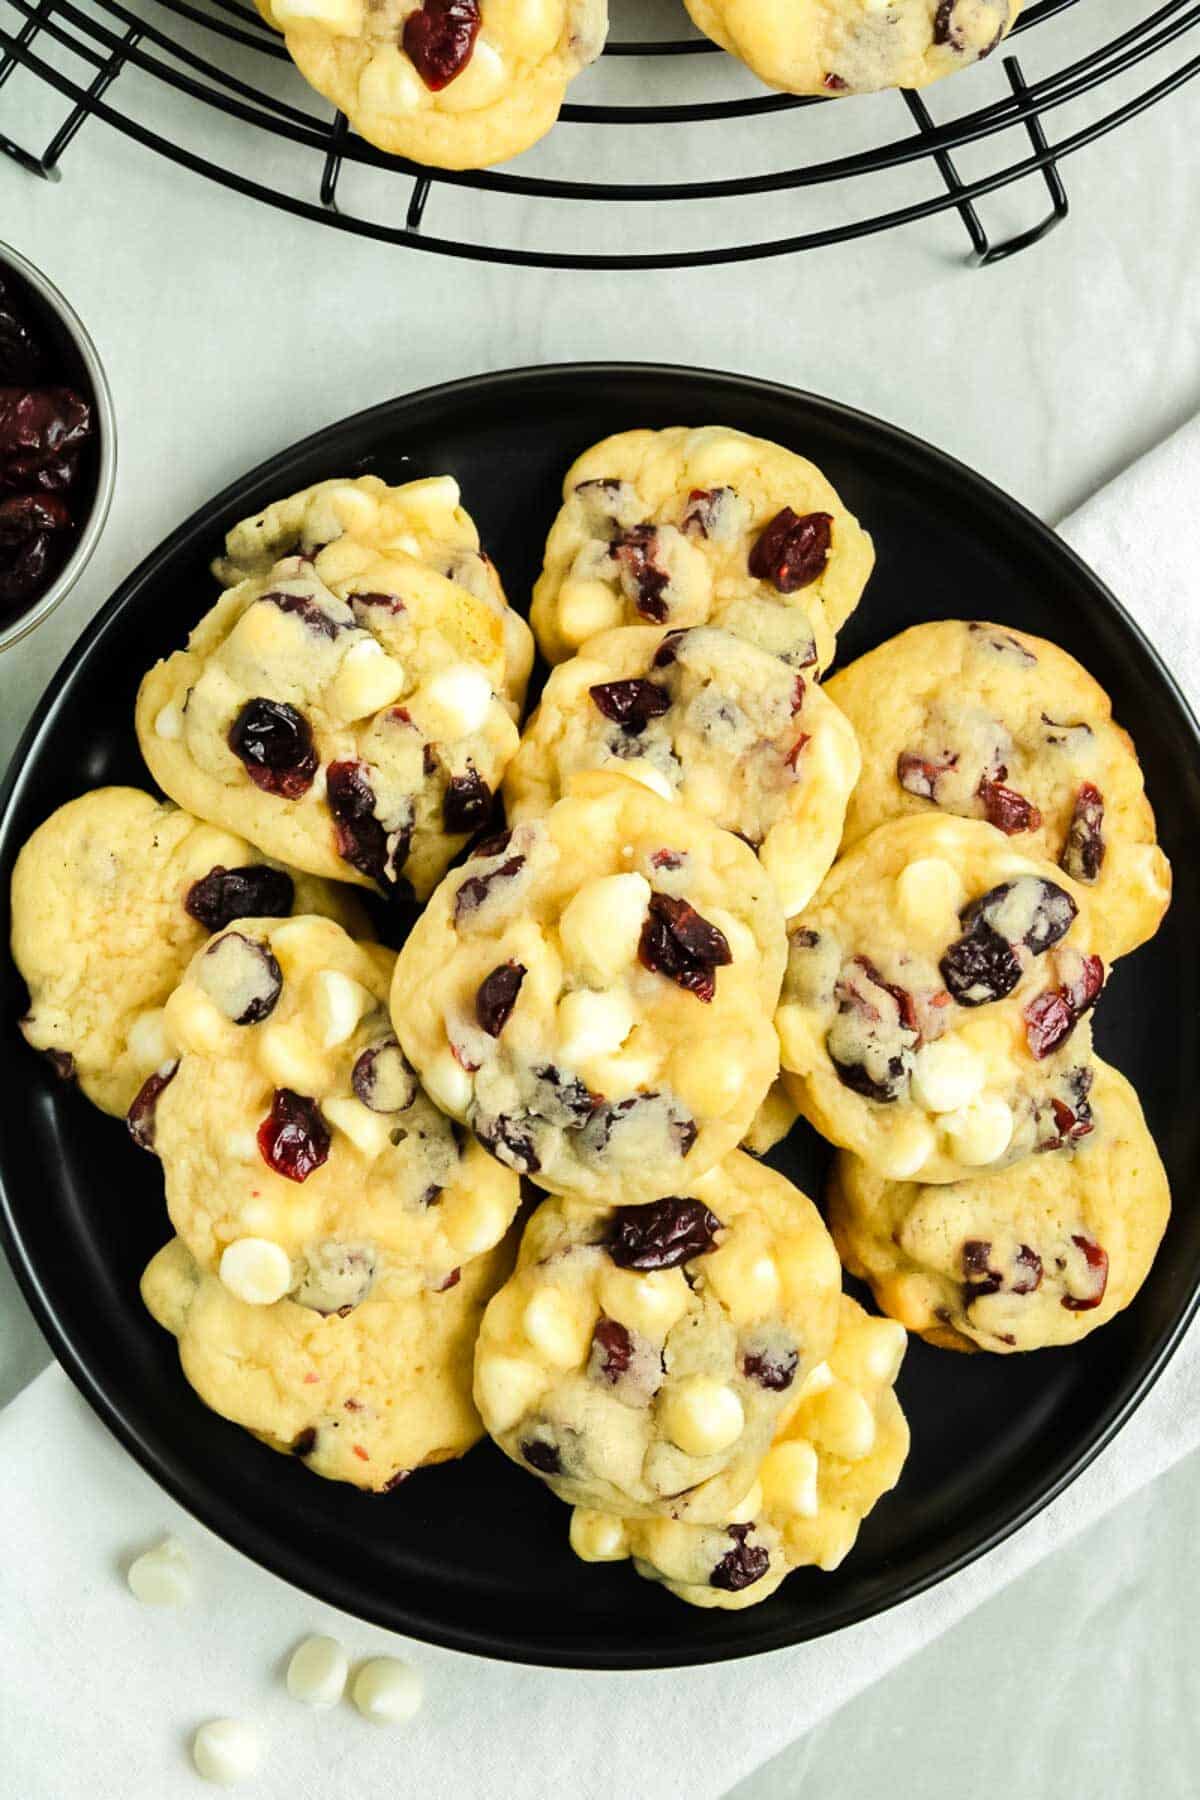 A large black plate filled with White Chocolate Chip and Cranberry Cookies.